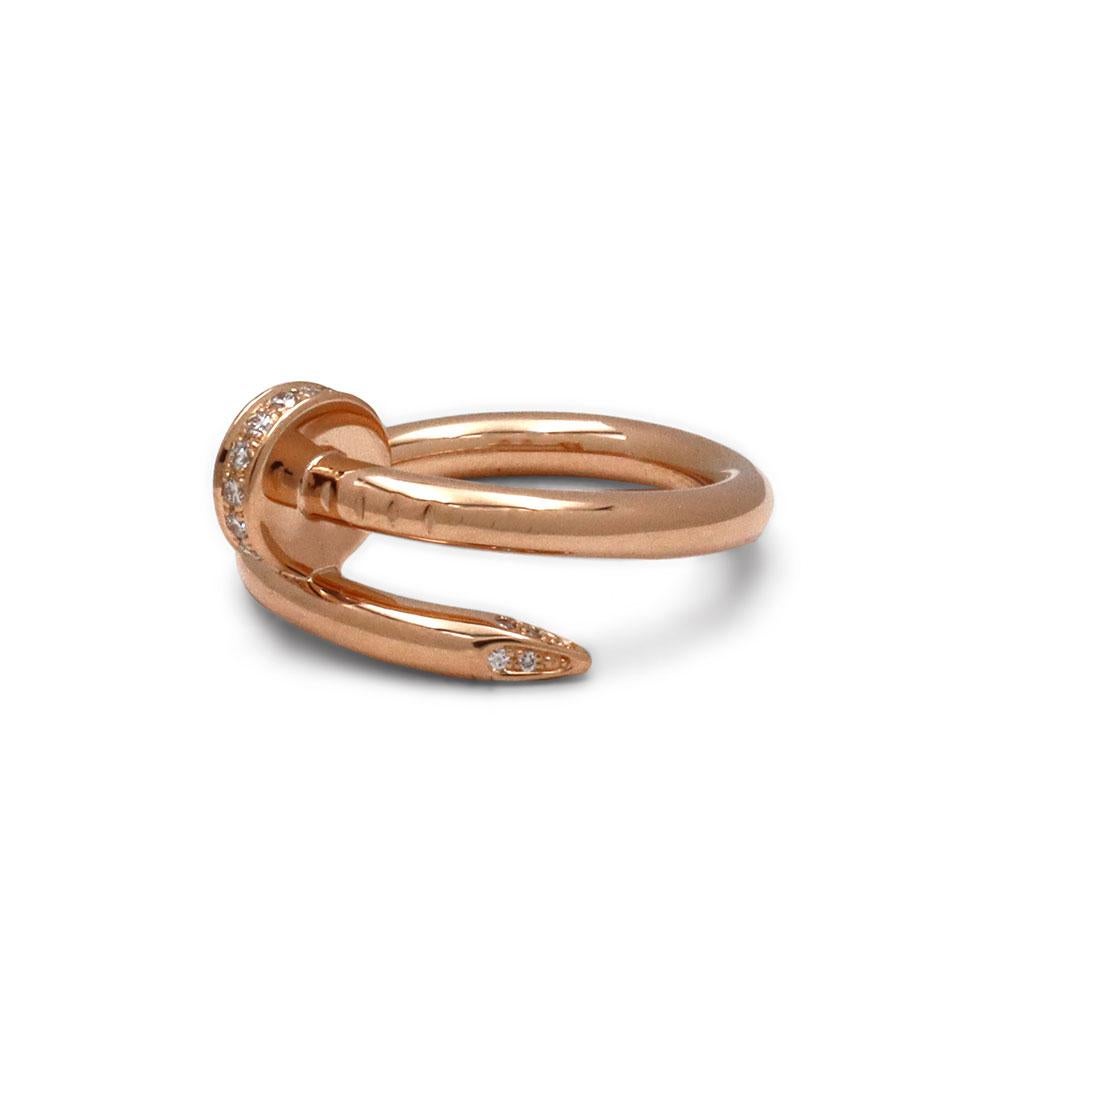 Authentic Cartier 'Juste un Clou' ring crafted in 18 karat rose gold and set with an estimated 0.17 carats of high-quality round brilliant cut diamonds. Signed Cartier, 51, 750, with serial number and hallmarks. Ring size 51 (US 5 3/4). The ring is